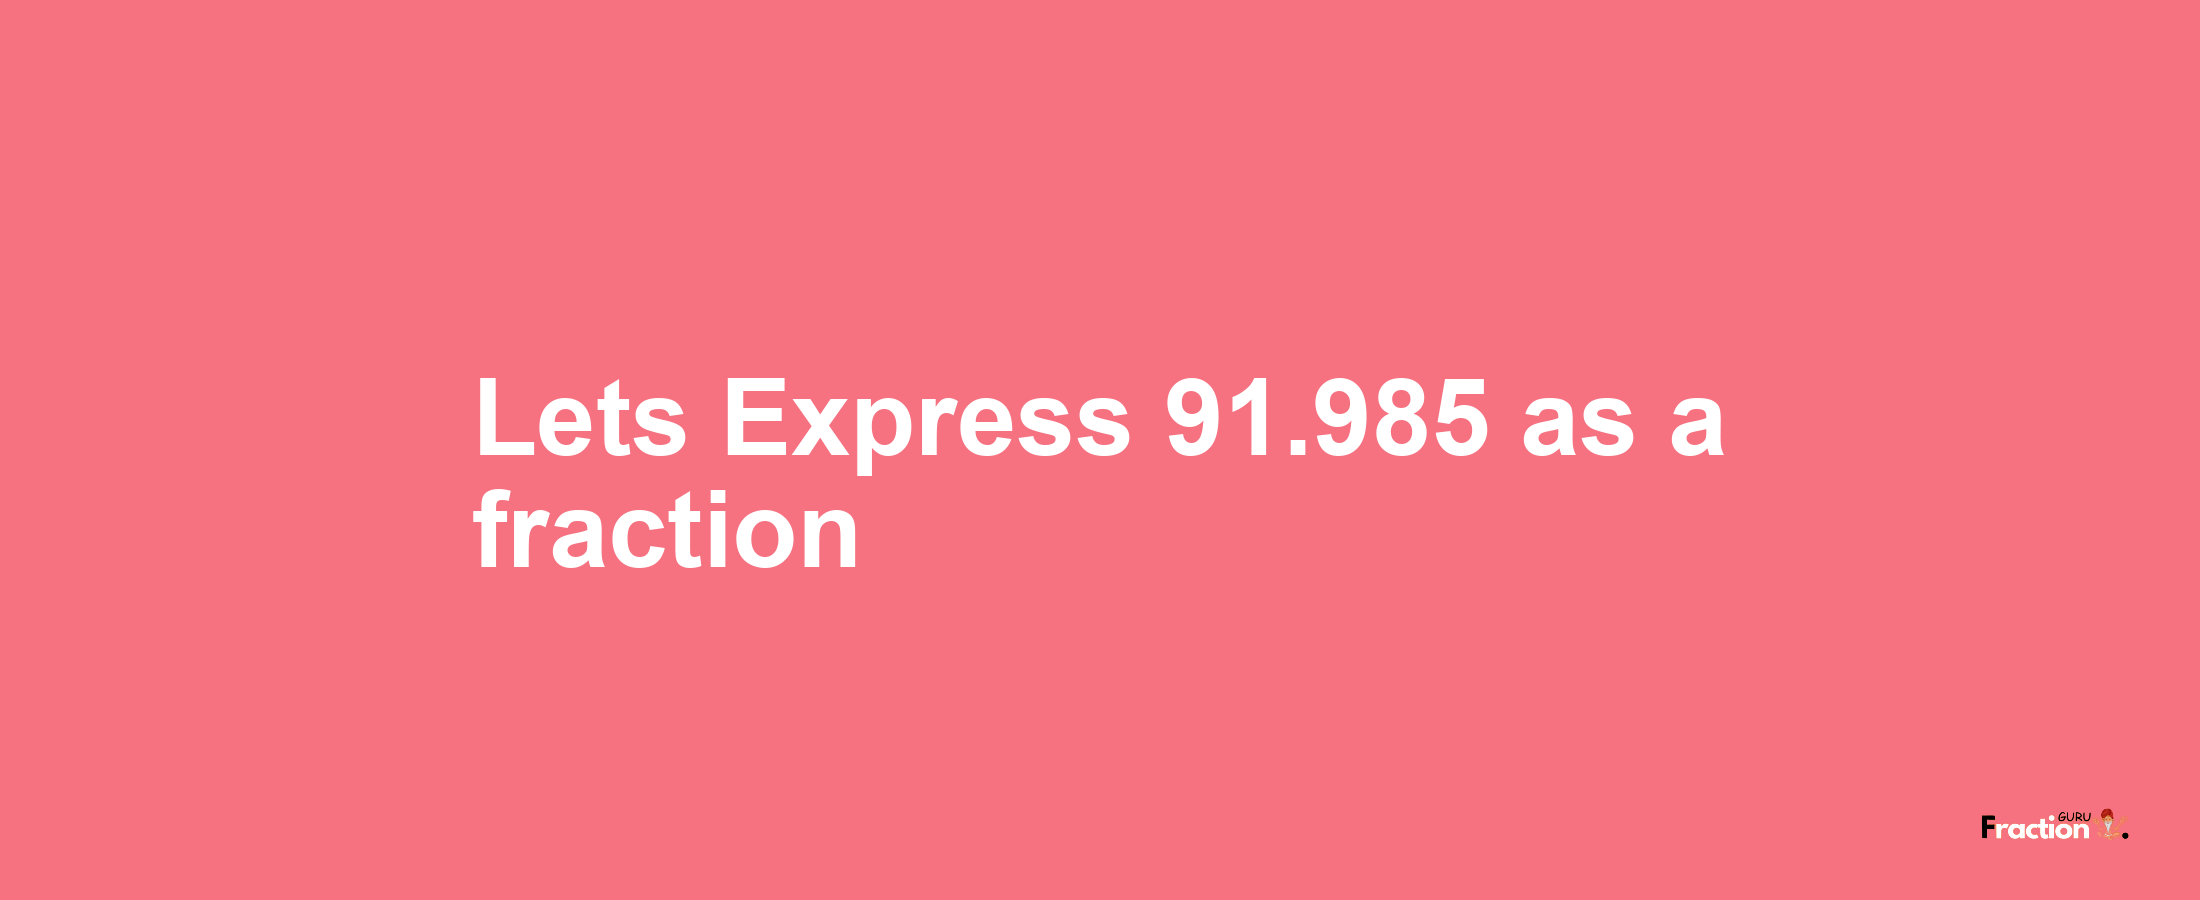 Lets Express 91.985 as afraction